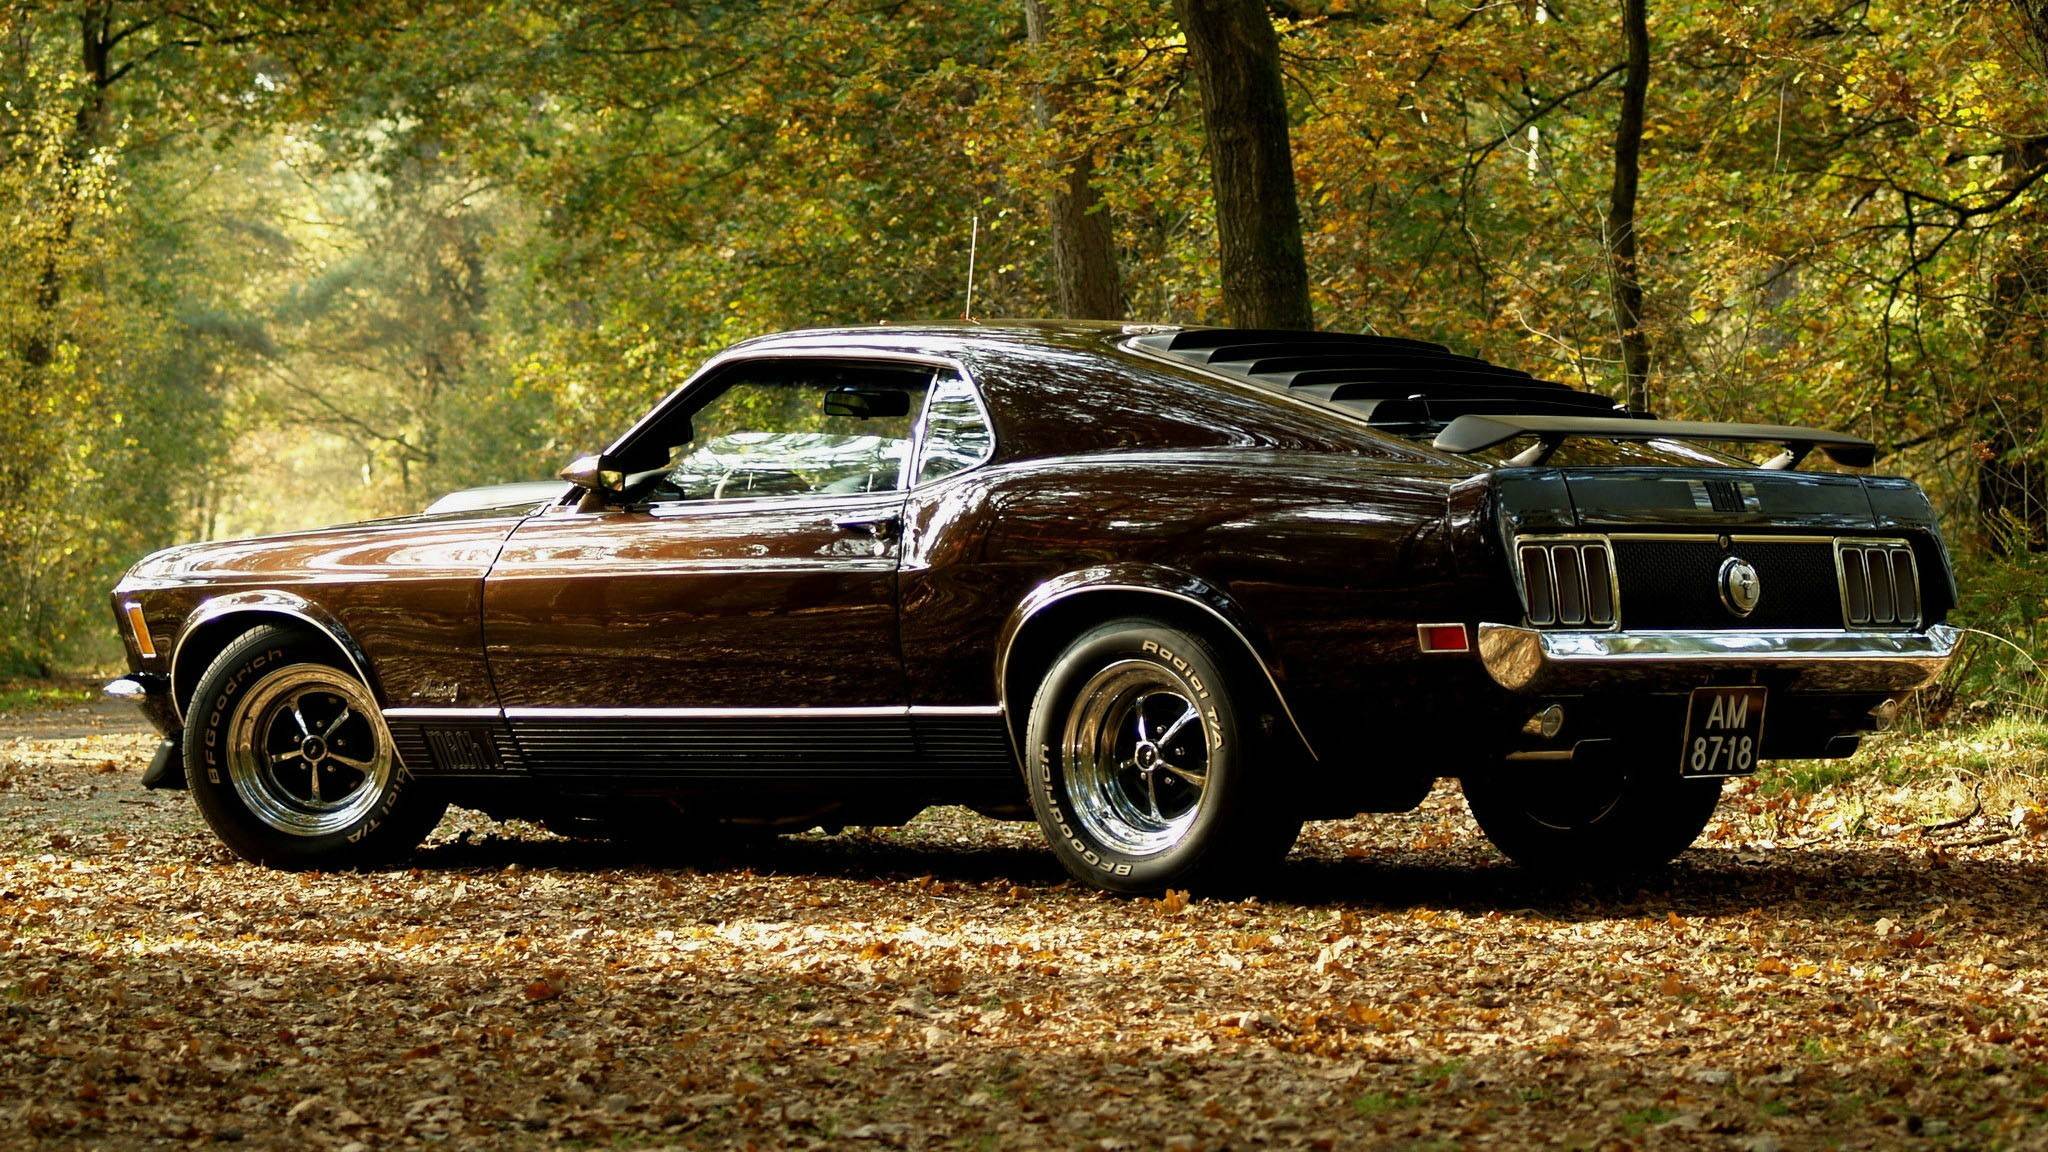 Amazing Muscle Car Pictures & Backgrounds